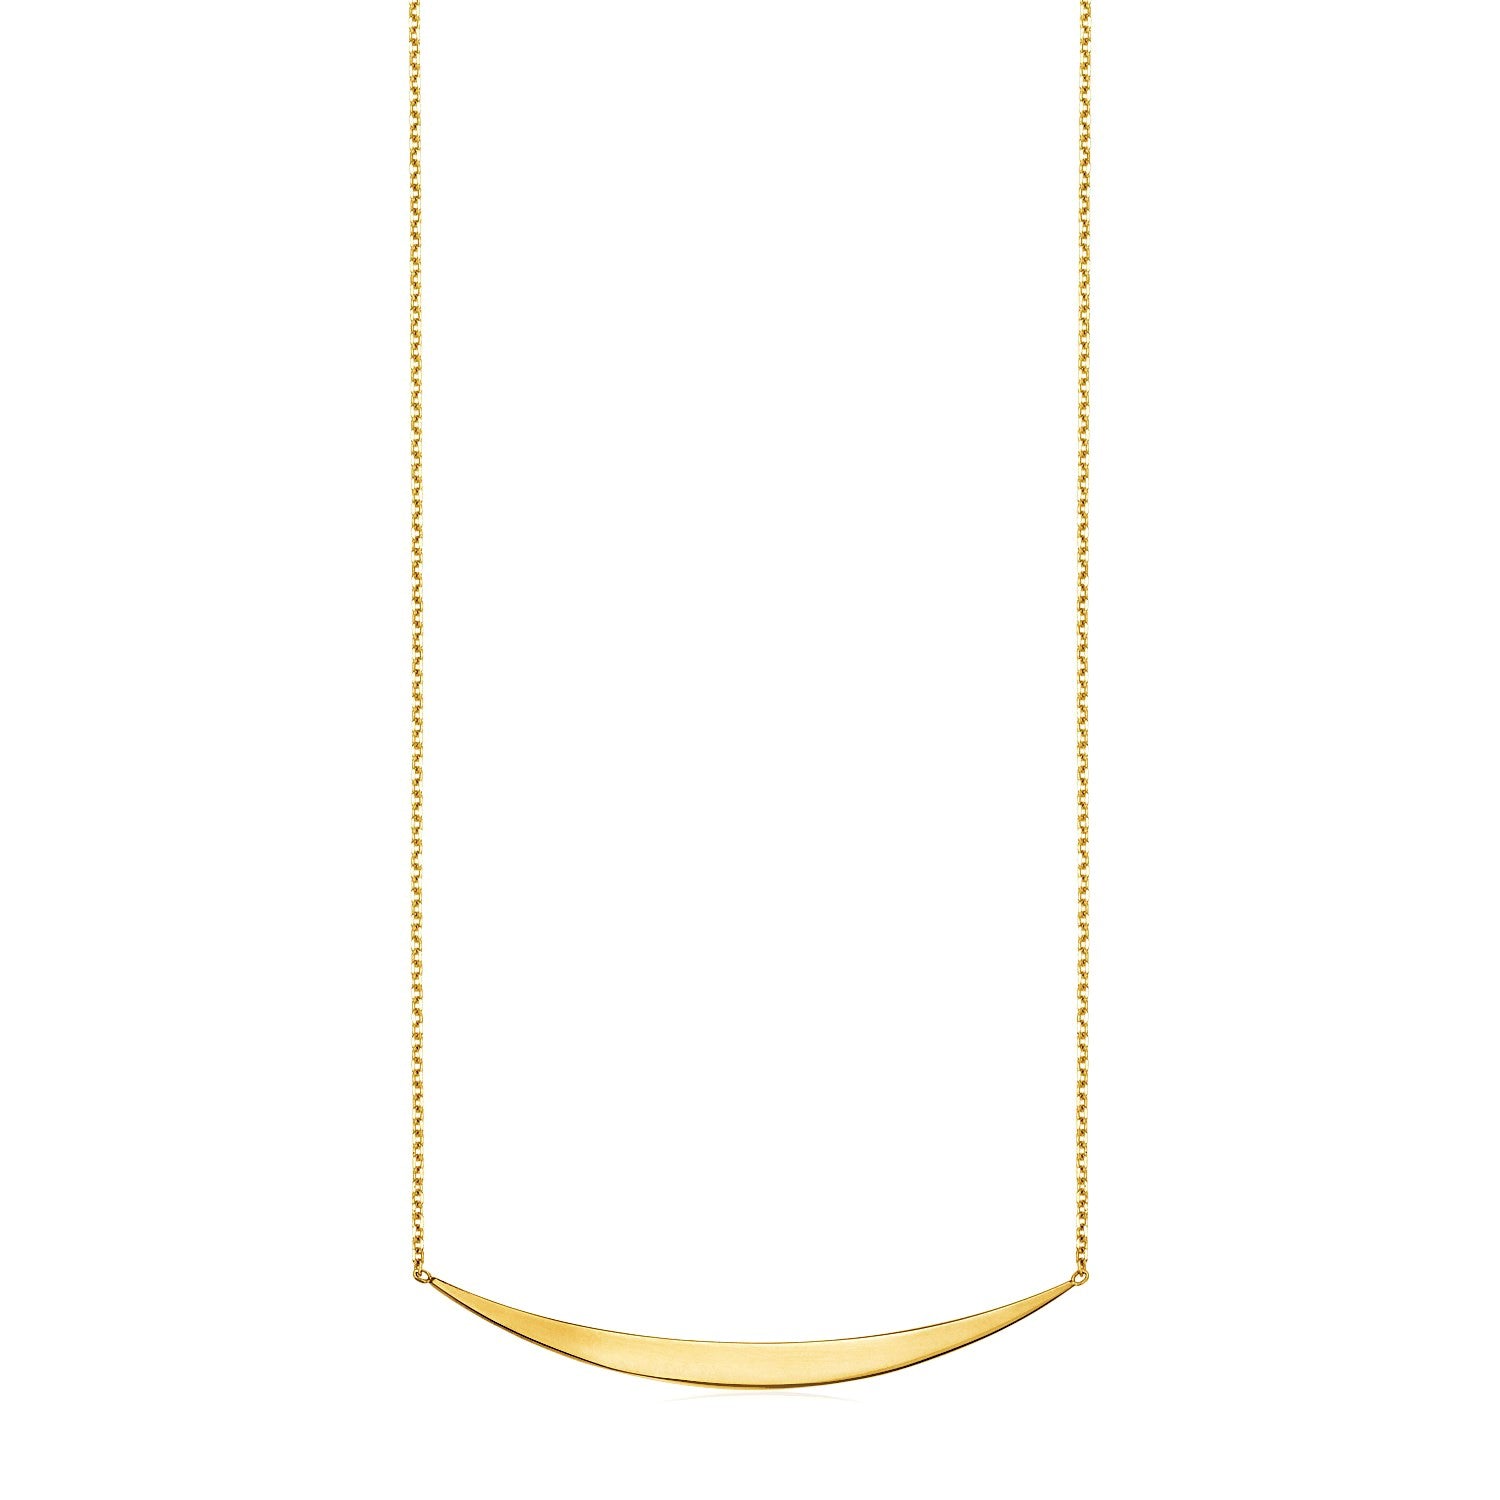 14K Yellow Gold Necklace With Polished Curved Bar Pendant 67104-1